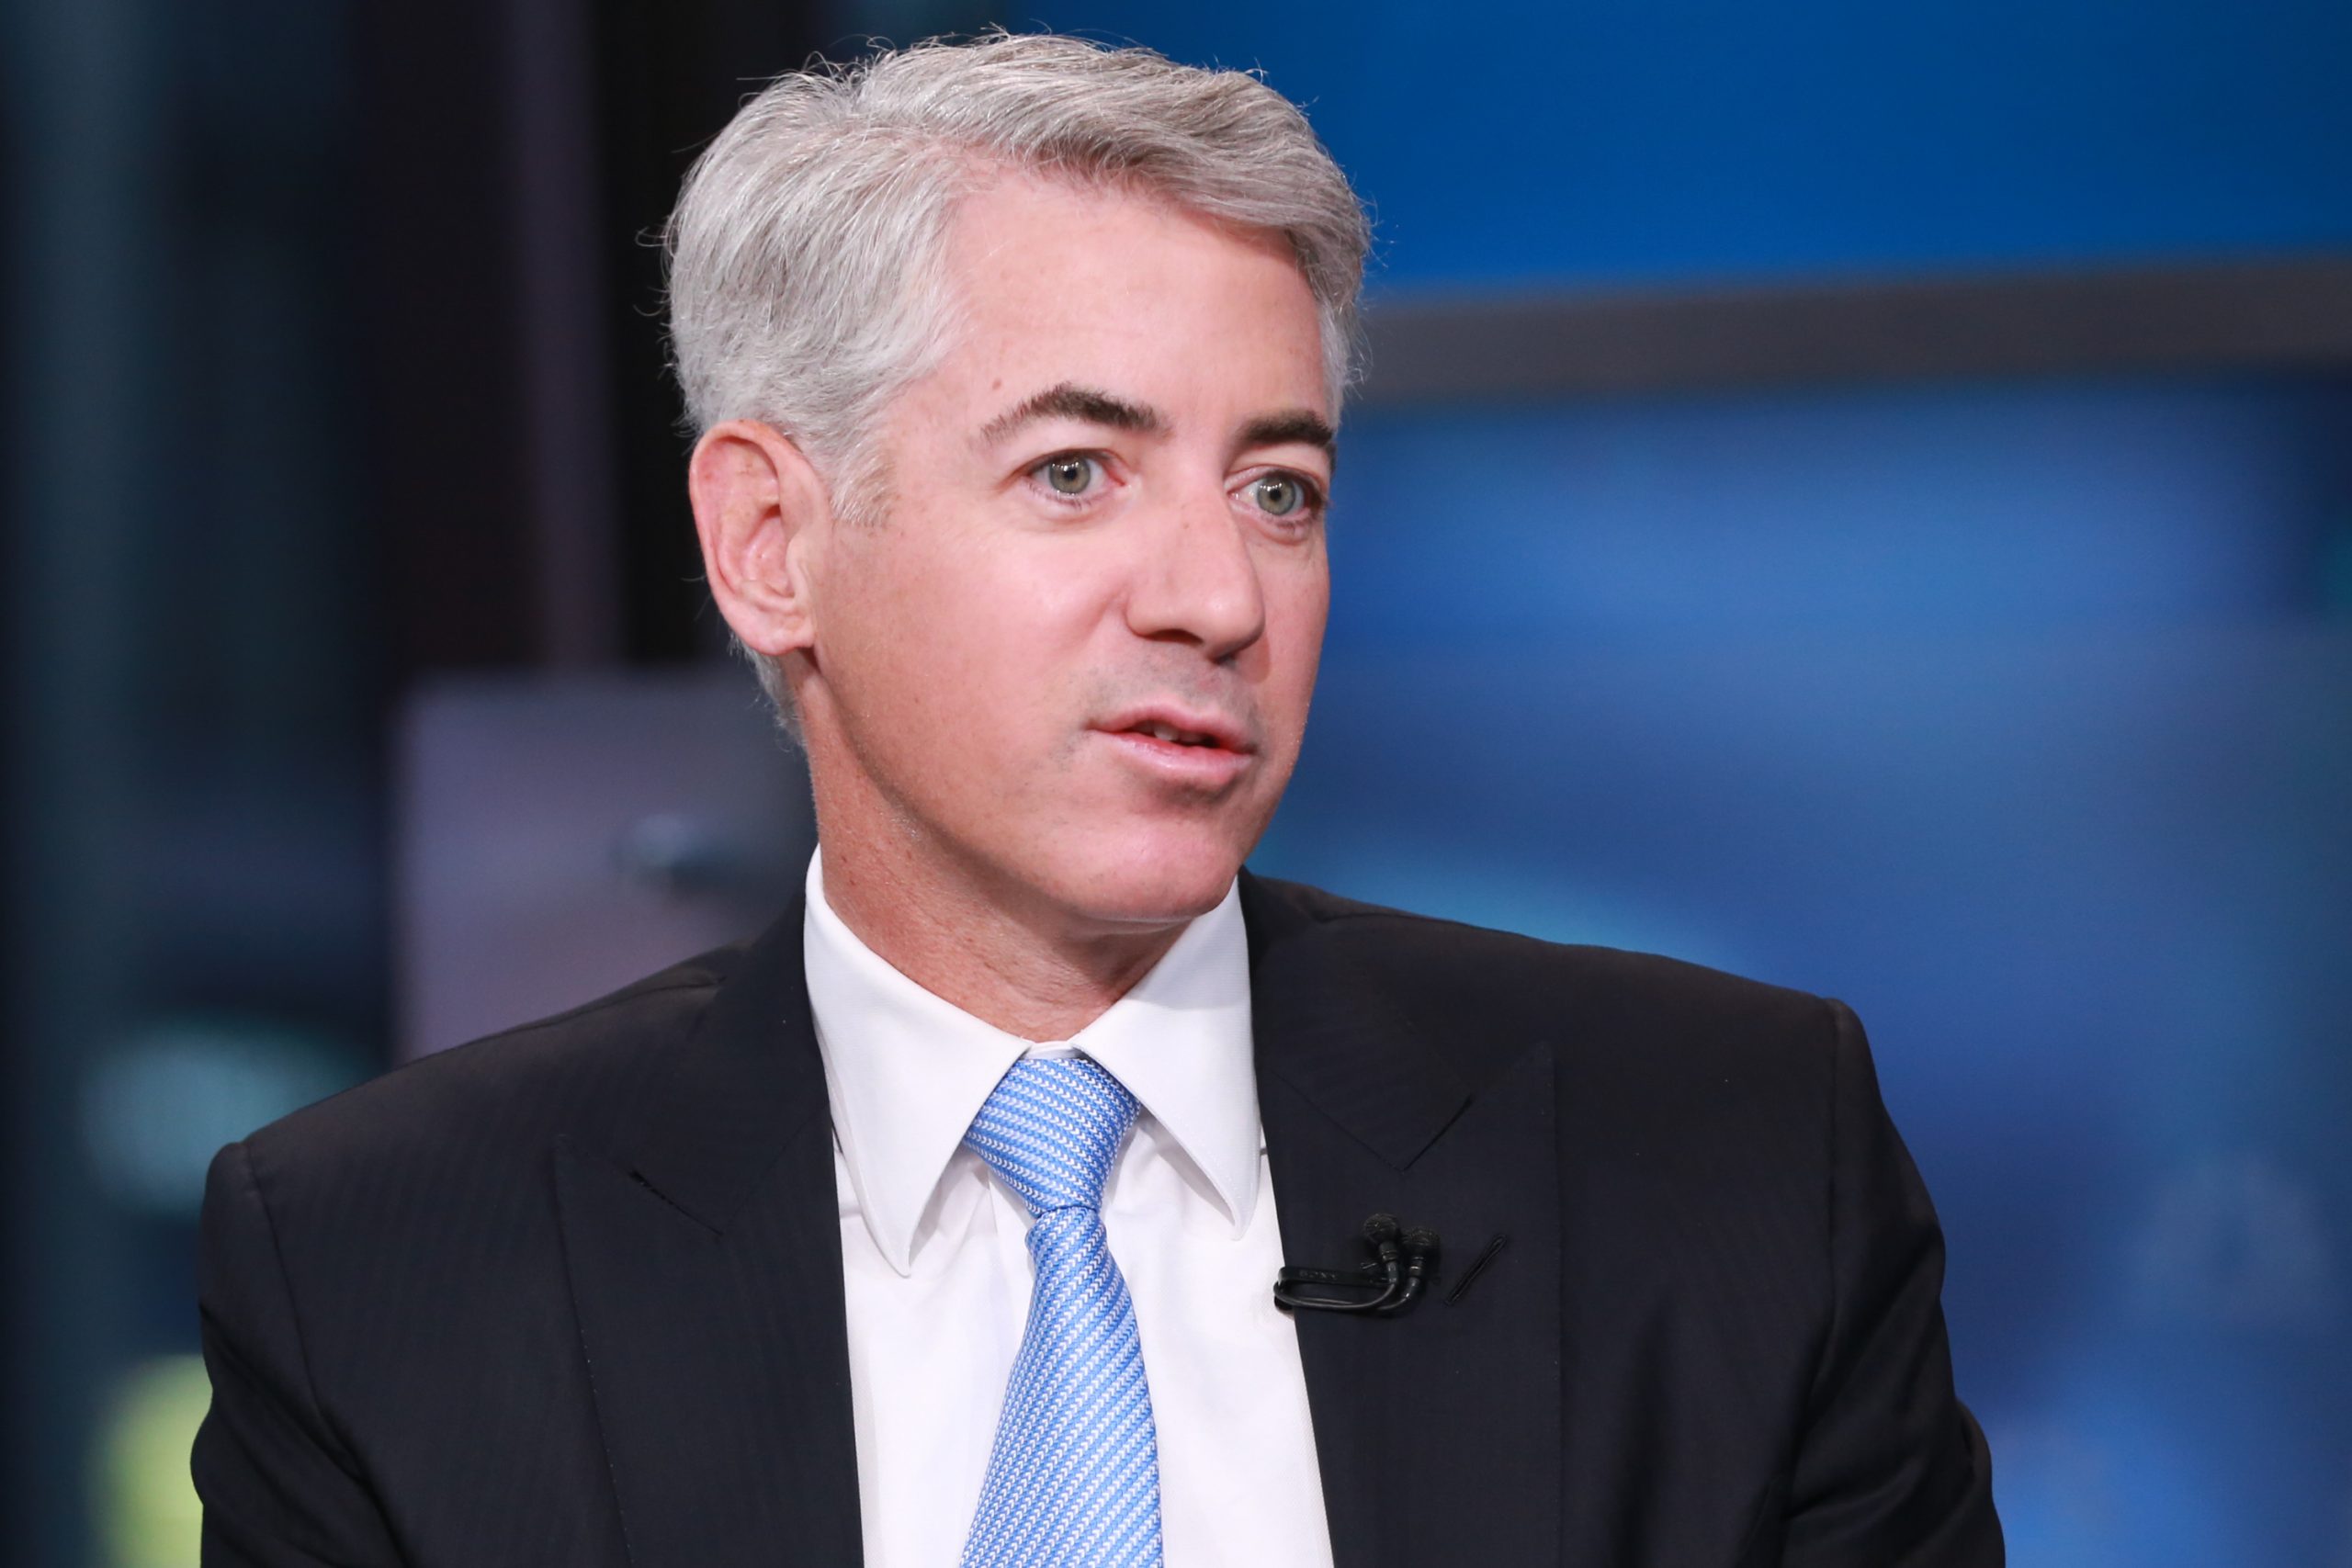 Bill Ackman Net Worth In 2020 Age, Wife, Career and All You Need to